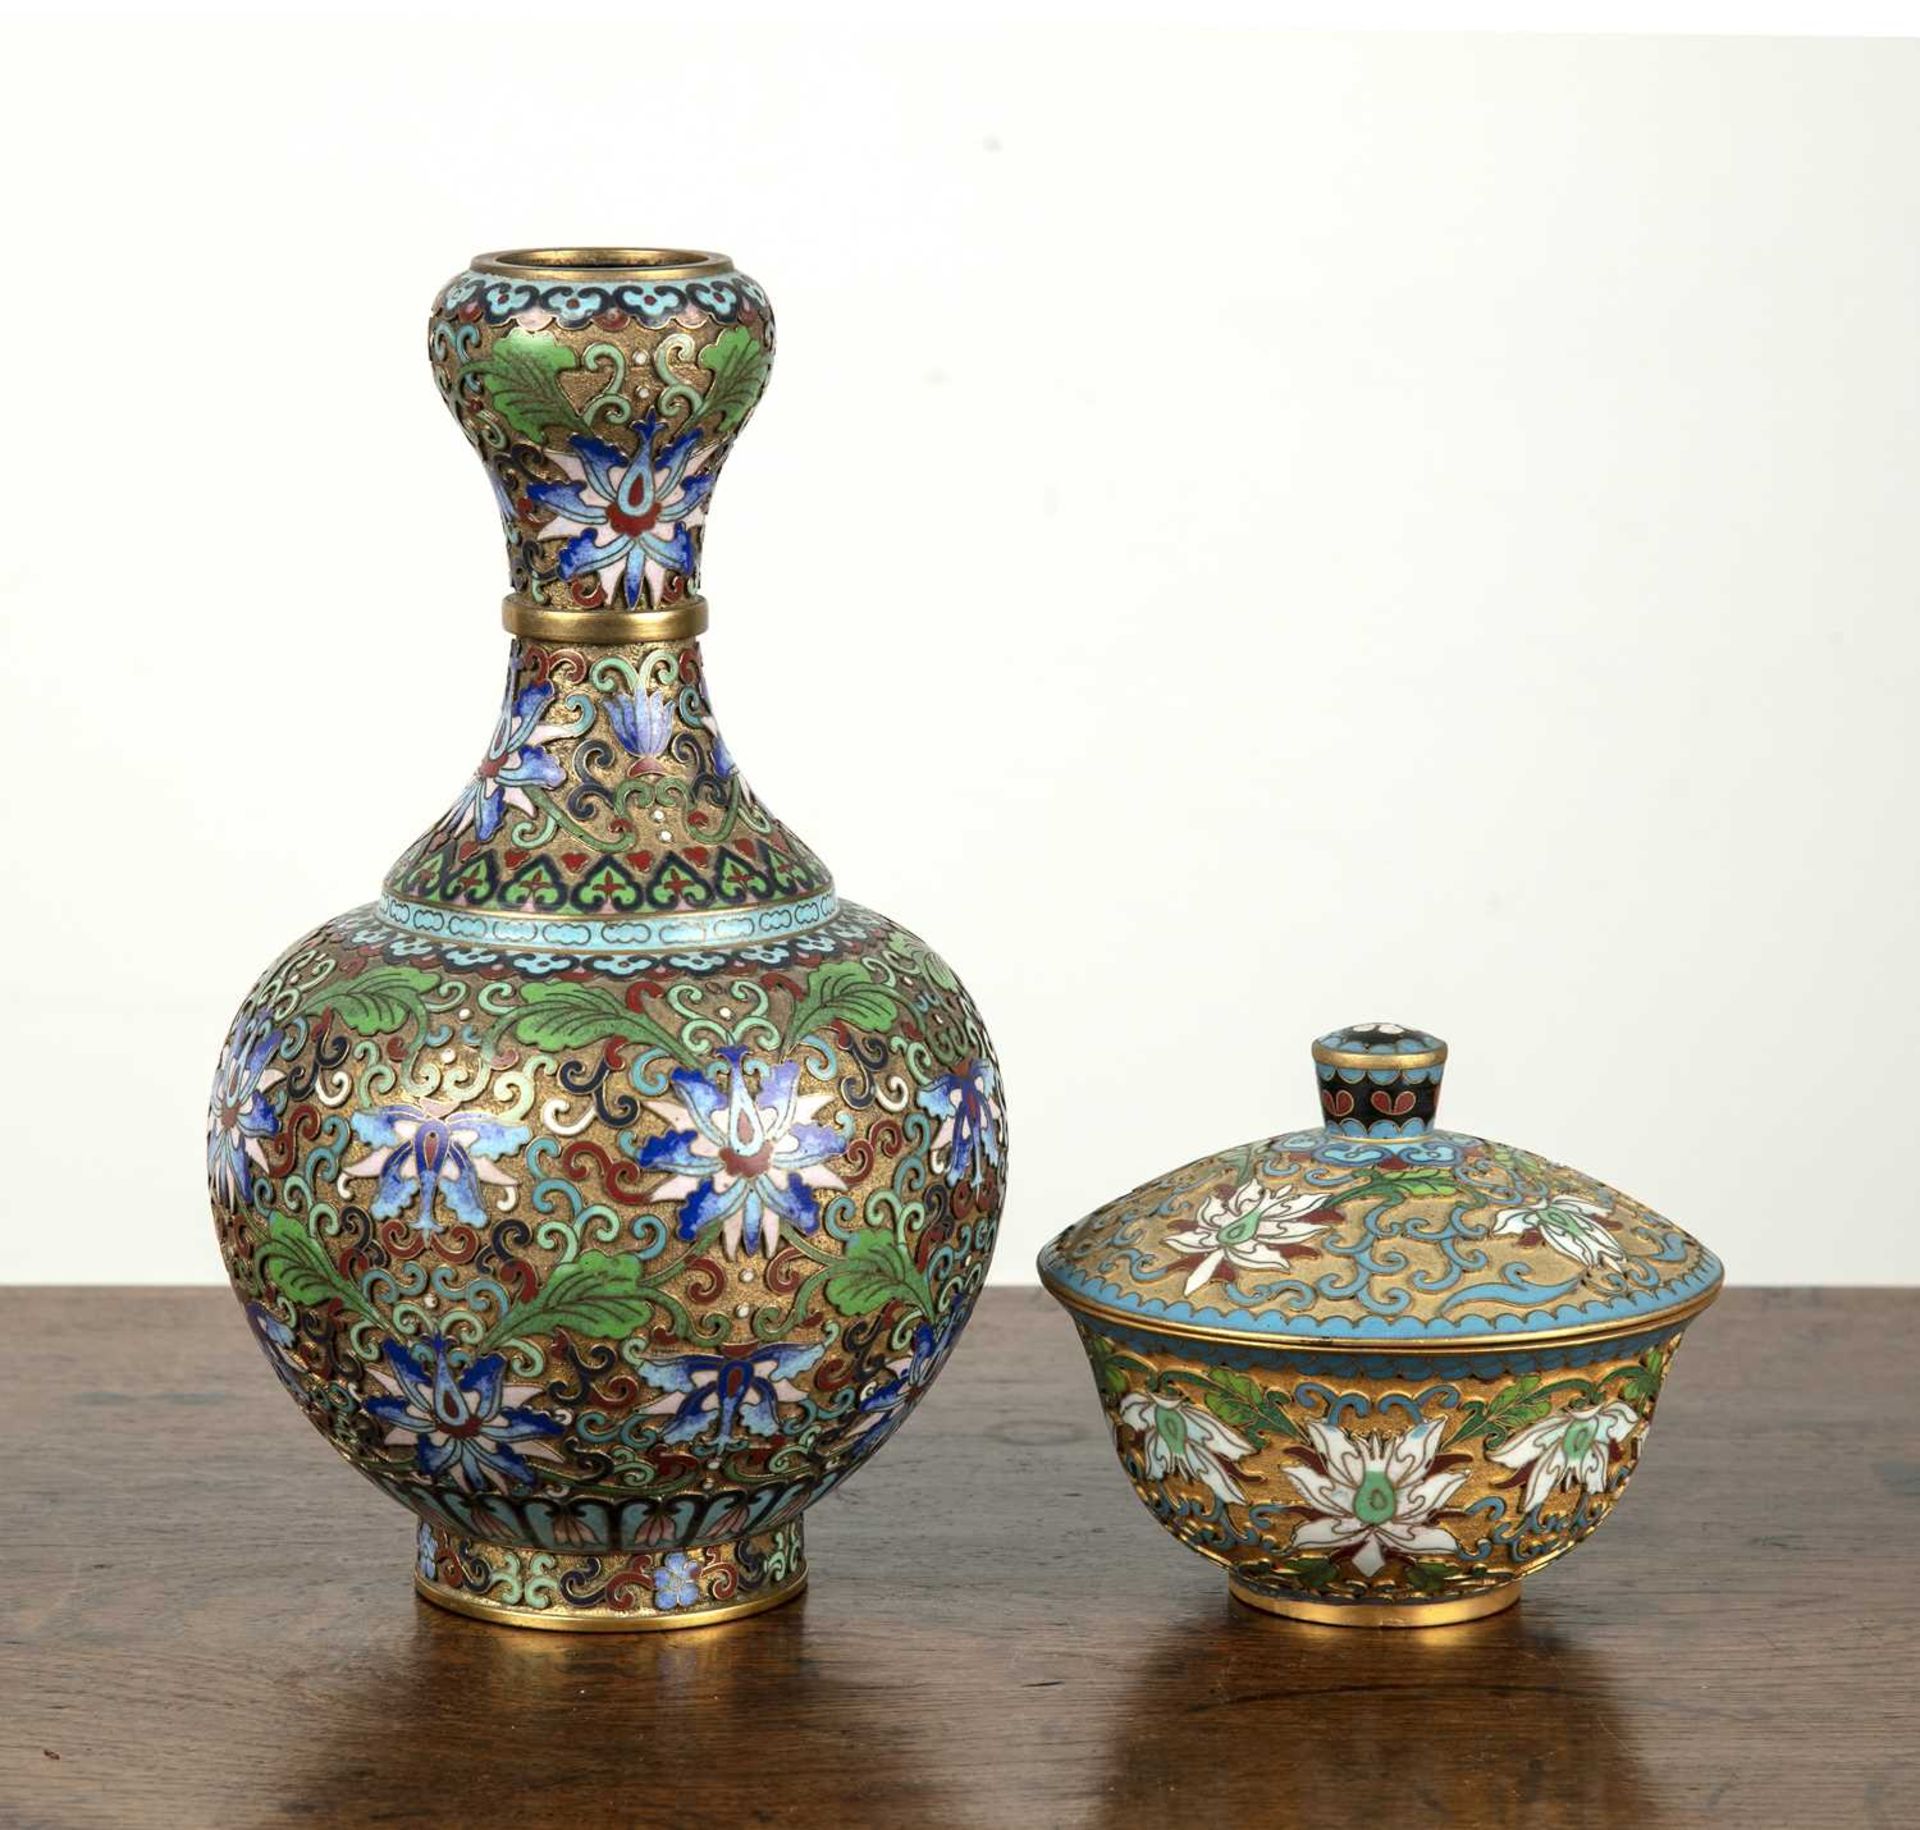 Cloisonne garlic neck vase Chinese, 19th/early 20th Century 21cm high and a cloisonne bowl and cover